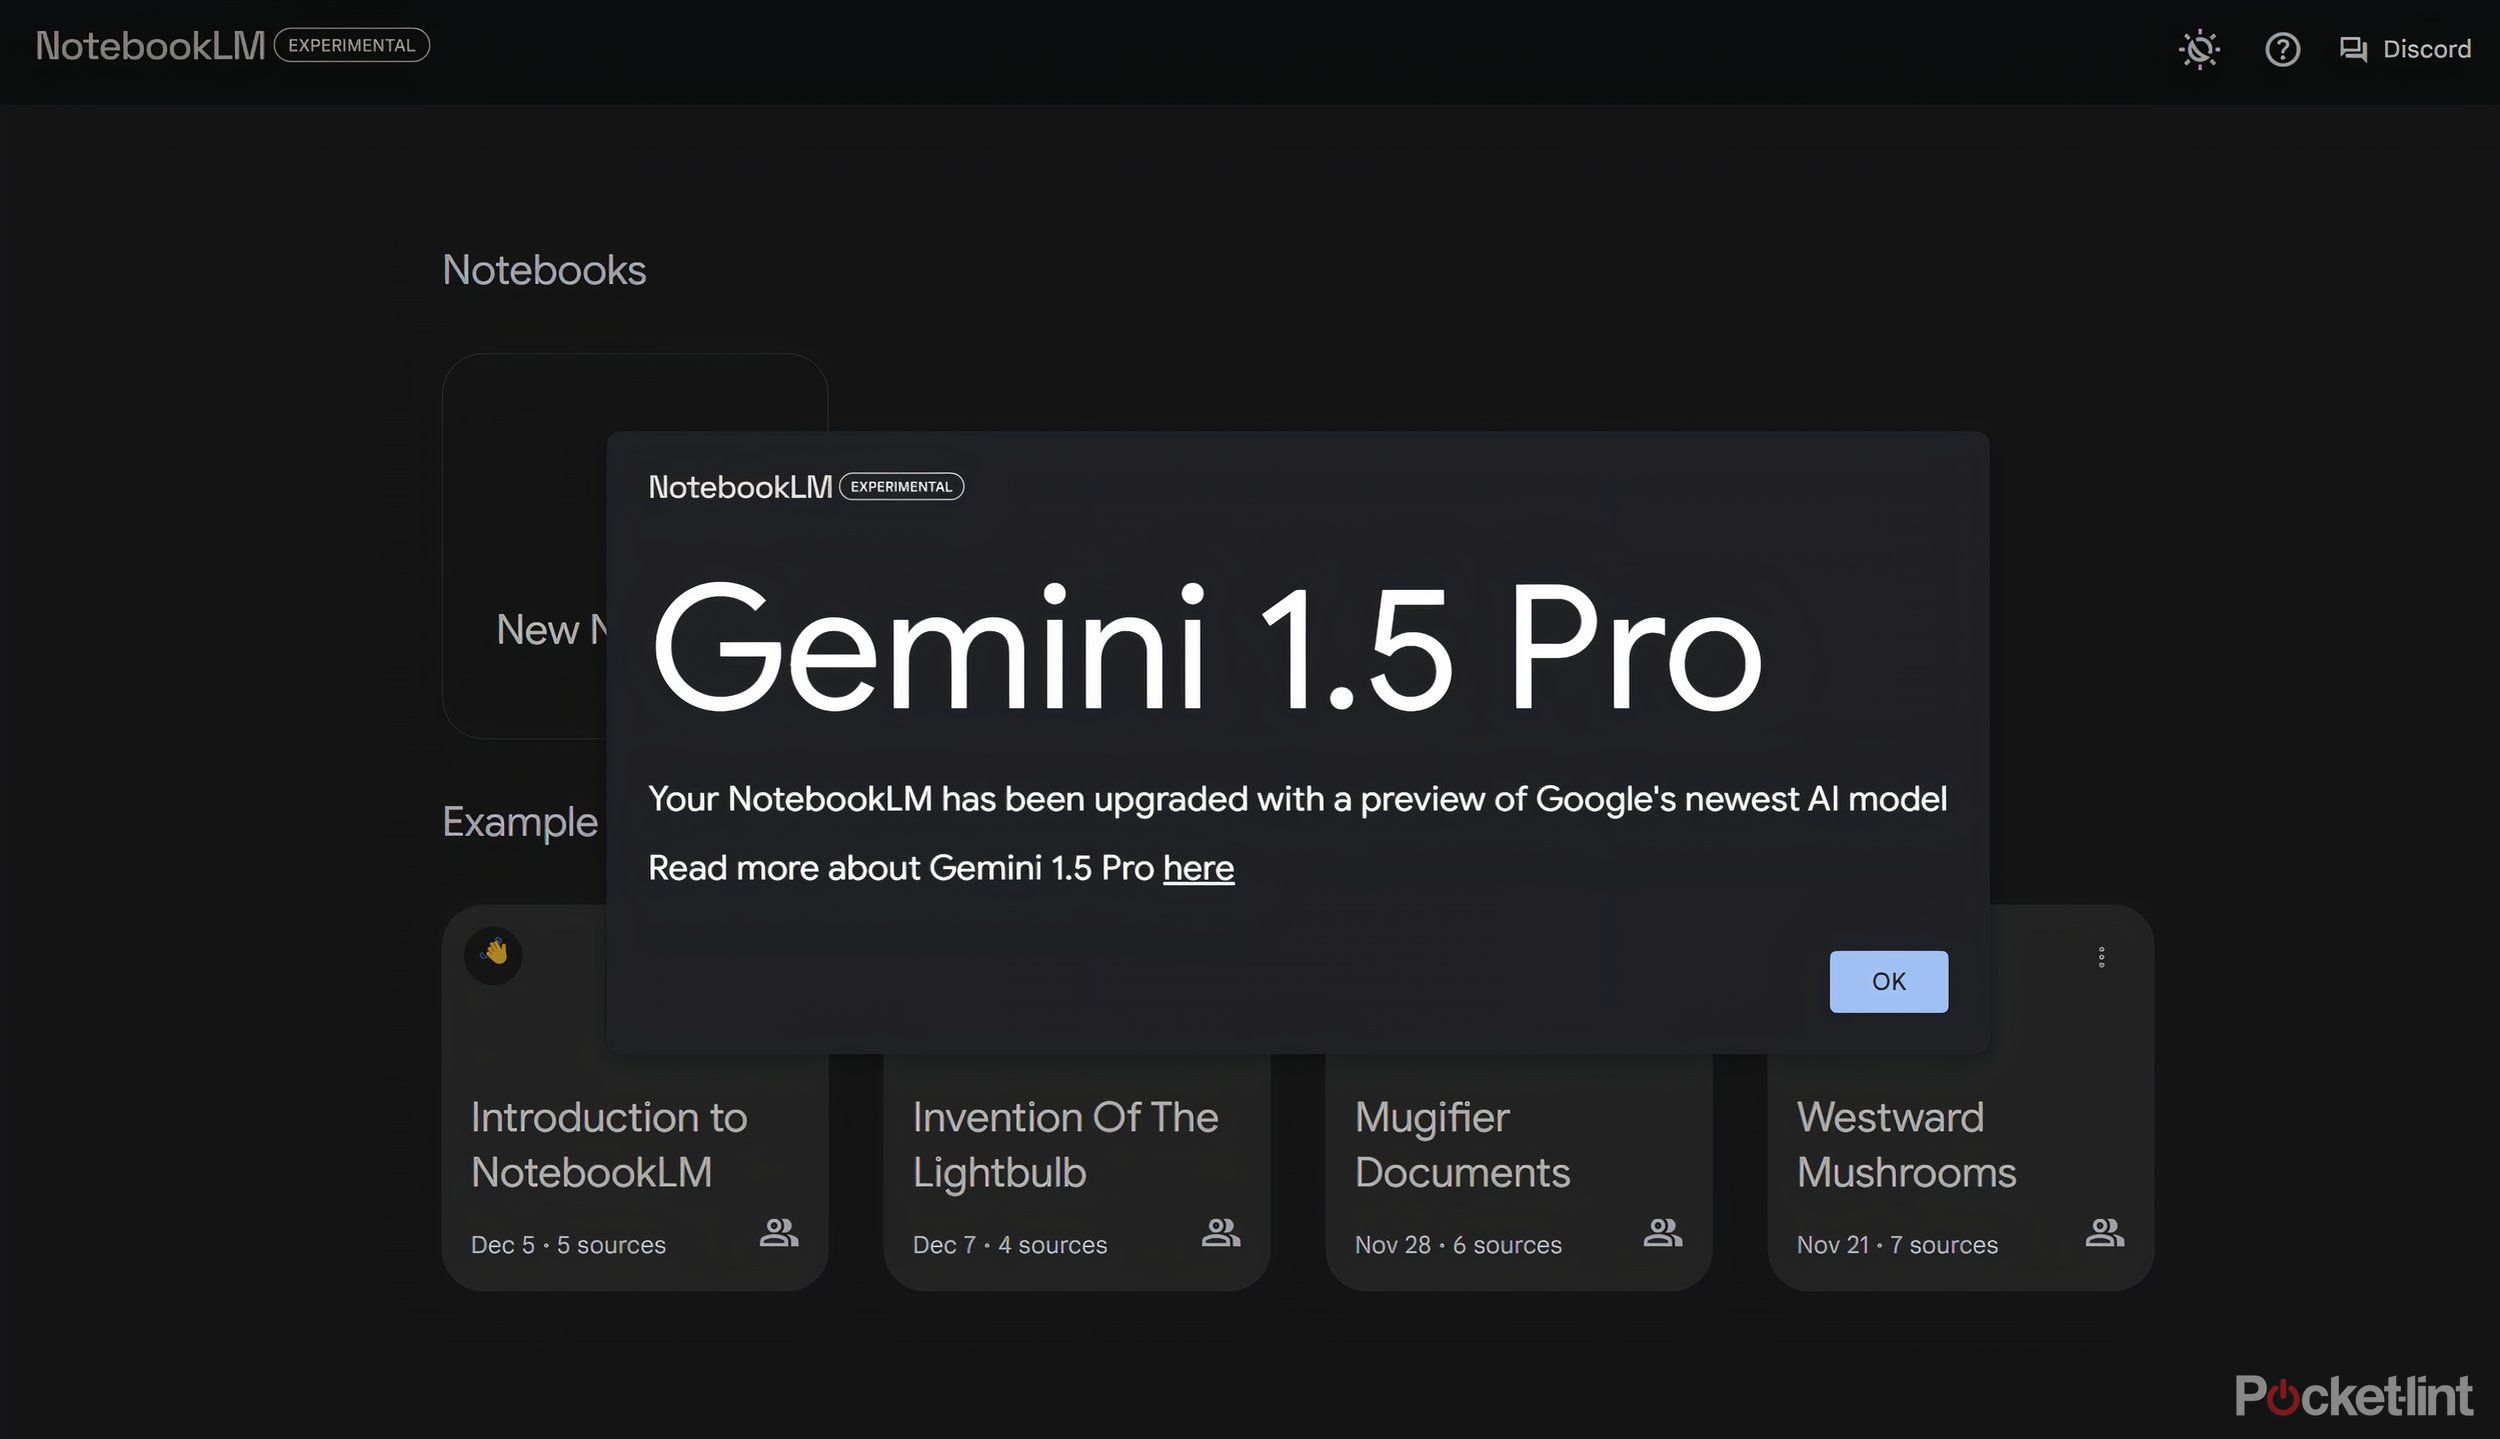 NotebookLM with Gemini 1.5 Pro